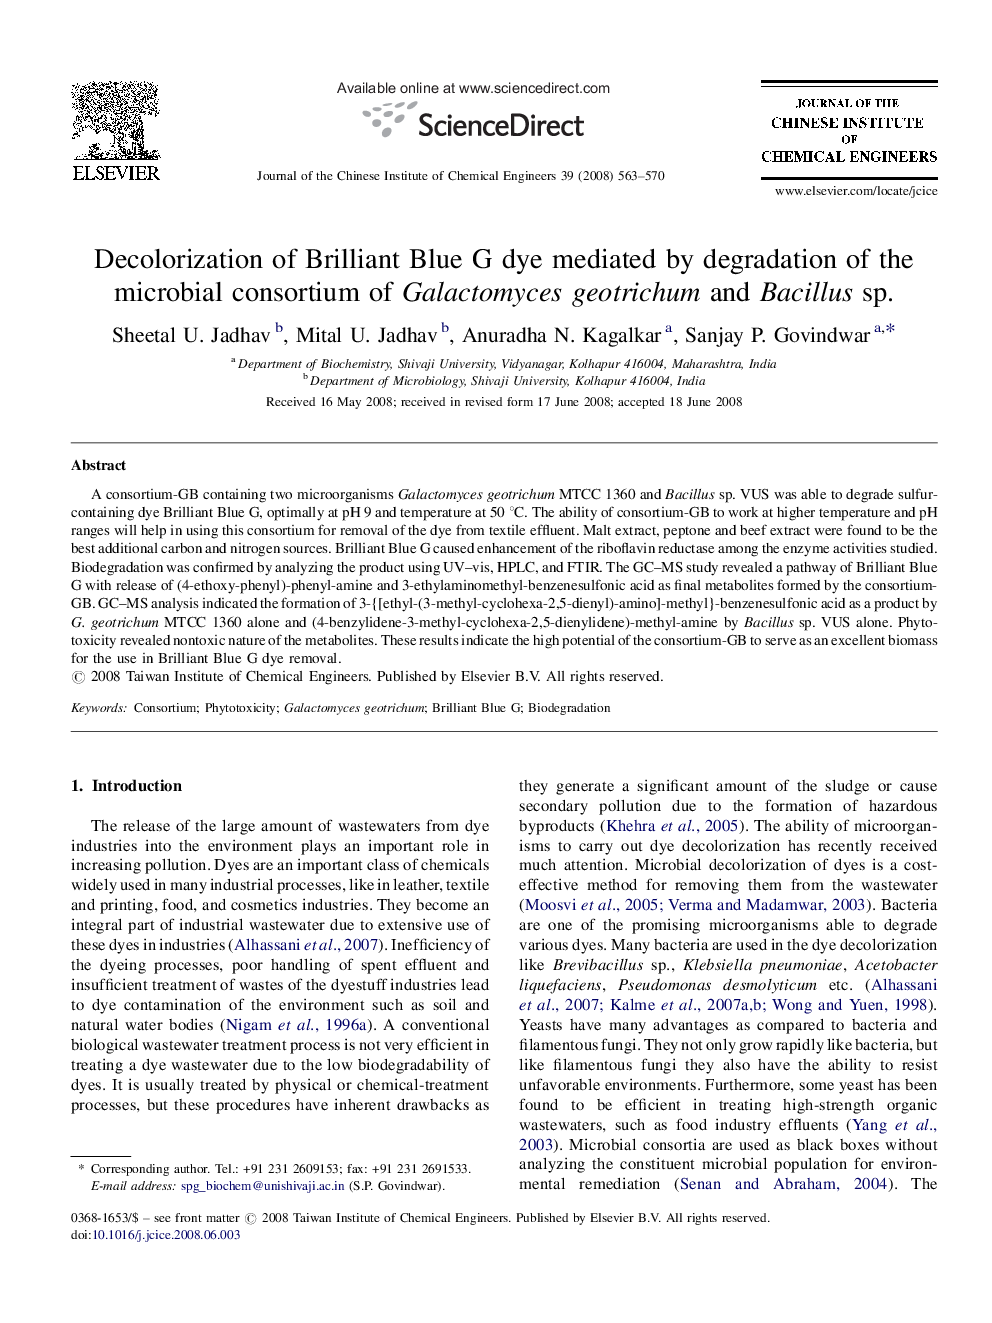 Decolorization of Brilliant Blue G dye mediated by degradation of the microbial consortium of Galactomyces geotrichum and Bacillus sp.